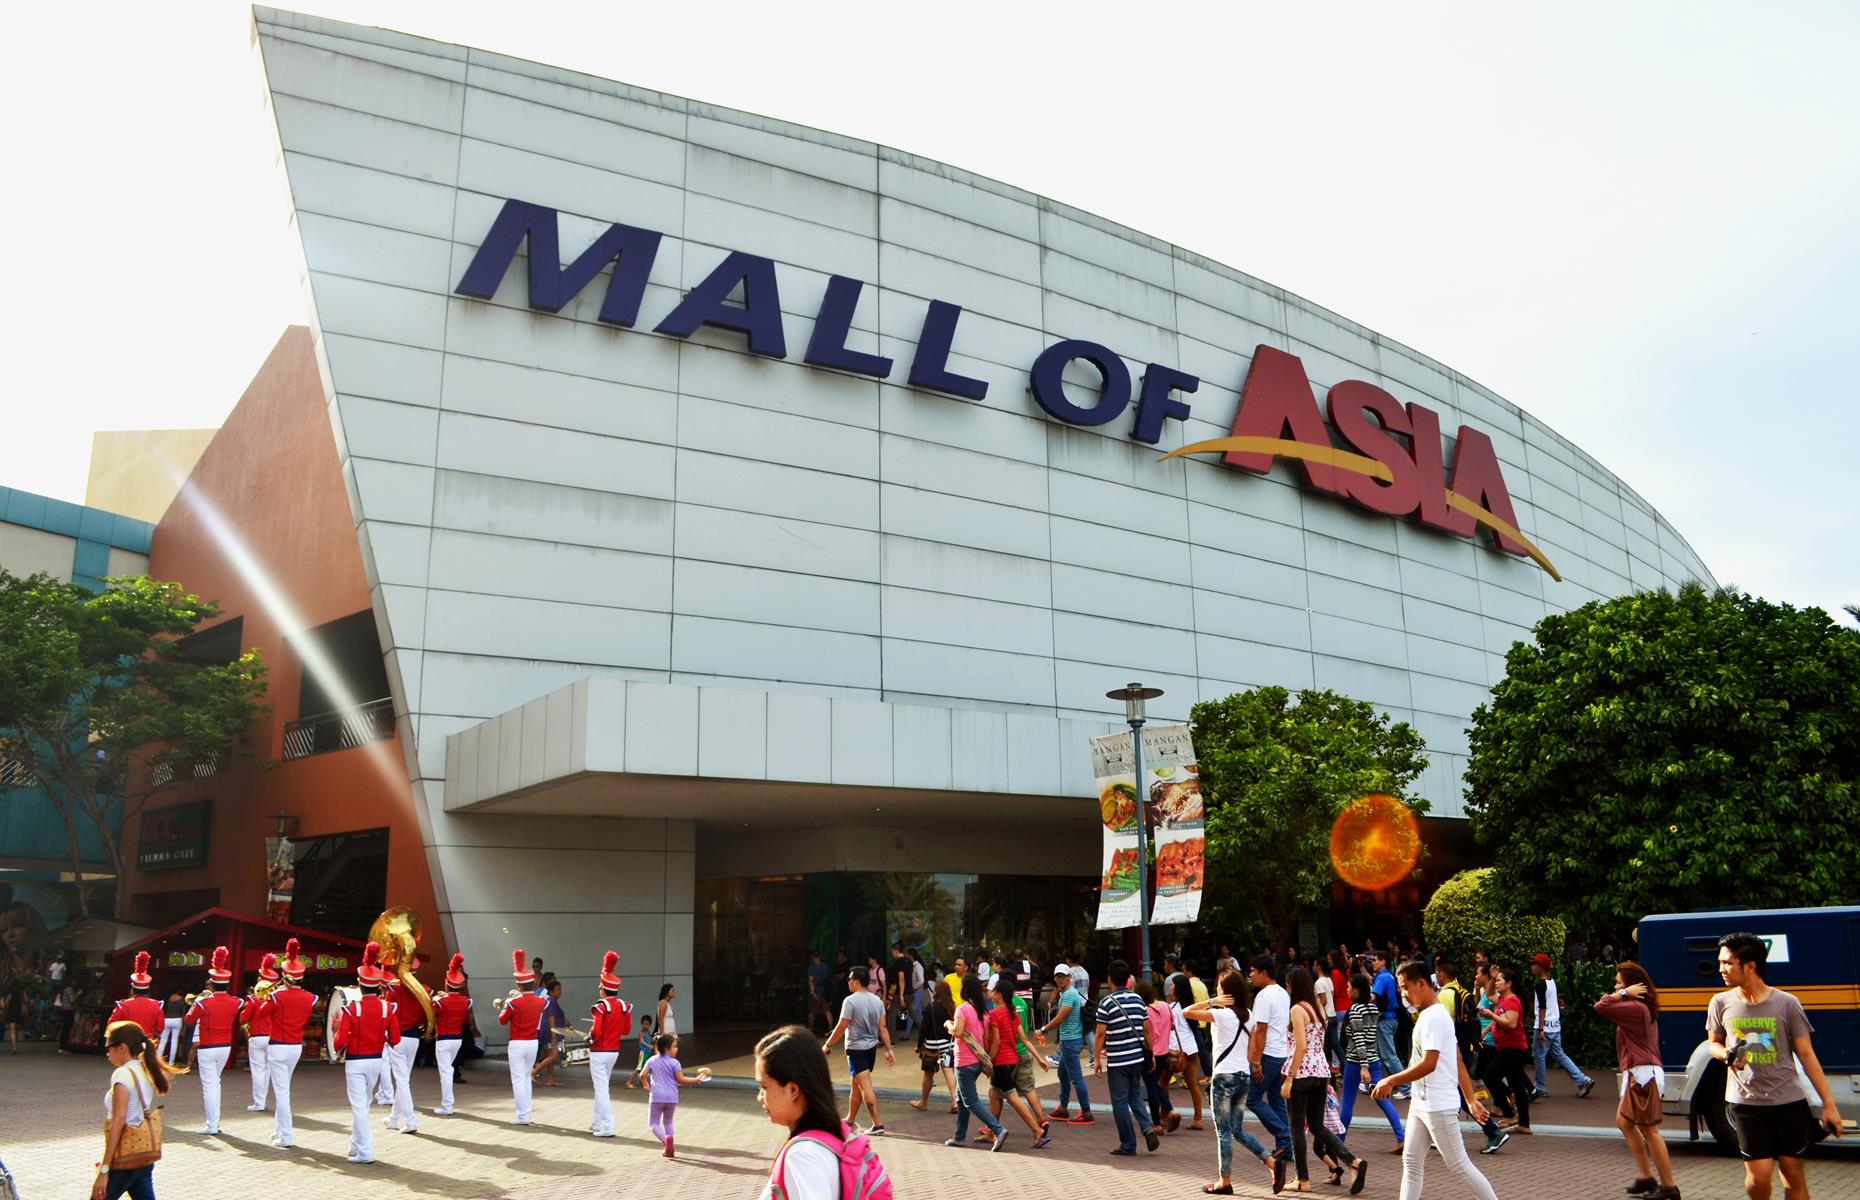 SM Mall of Asia, Pasay City, Philippines: $69.7 million (£56.9m)